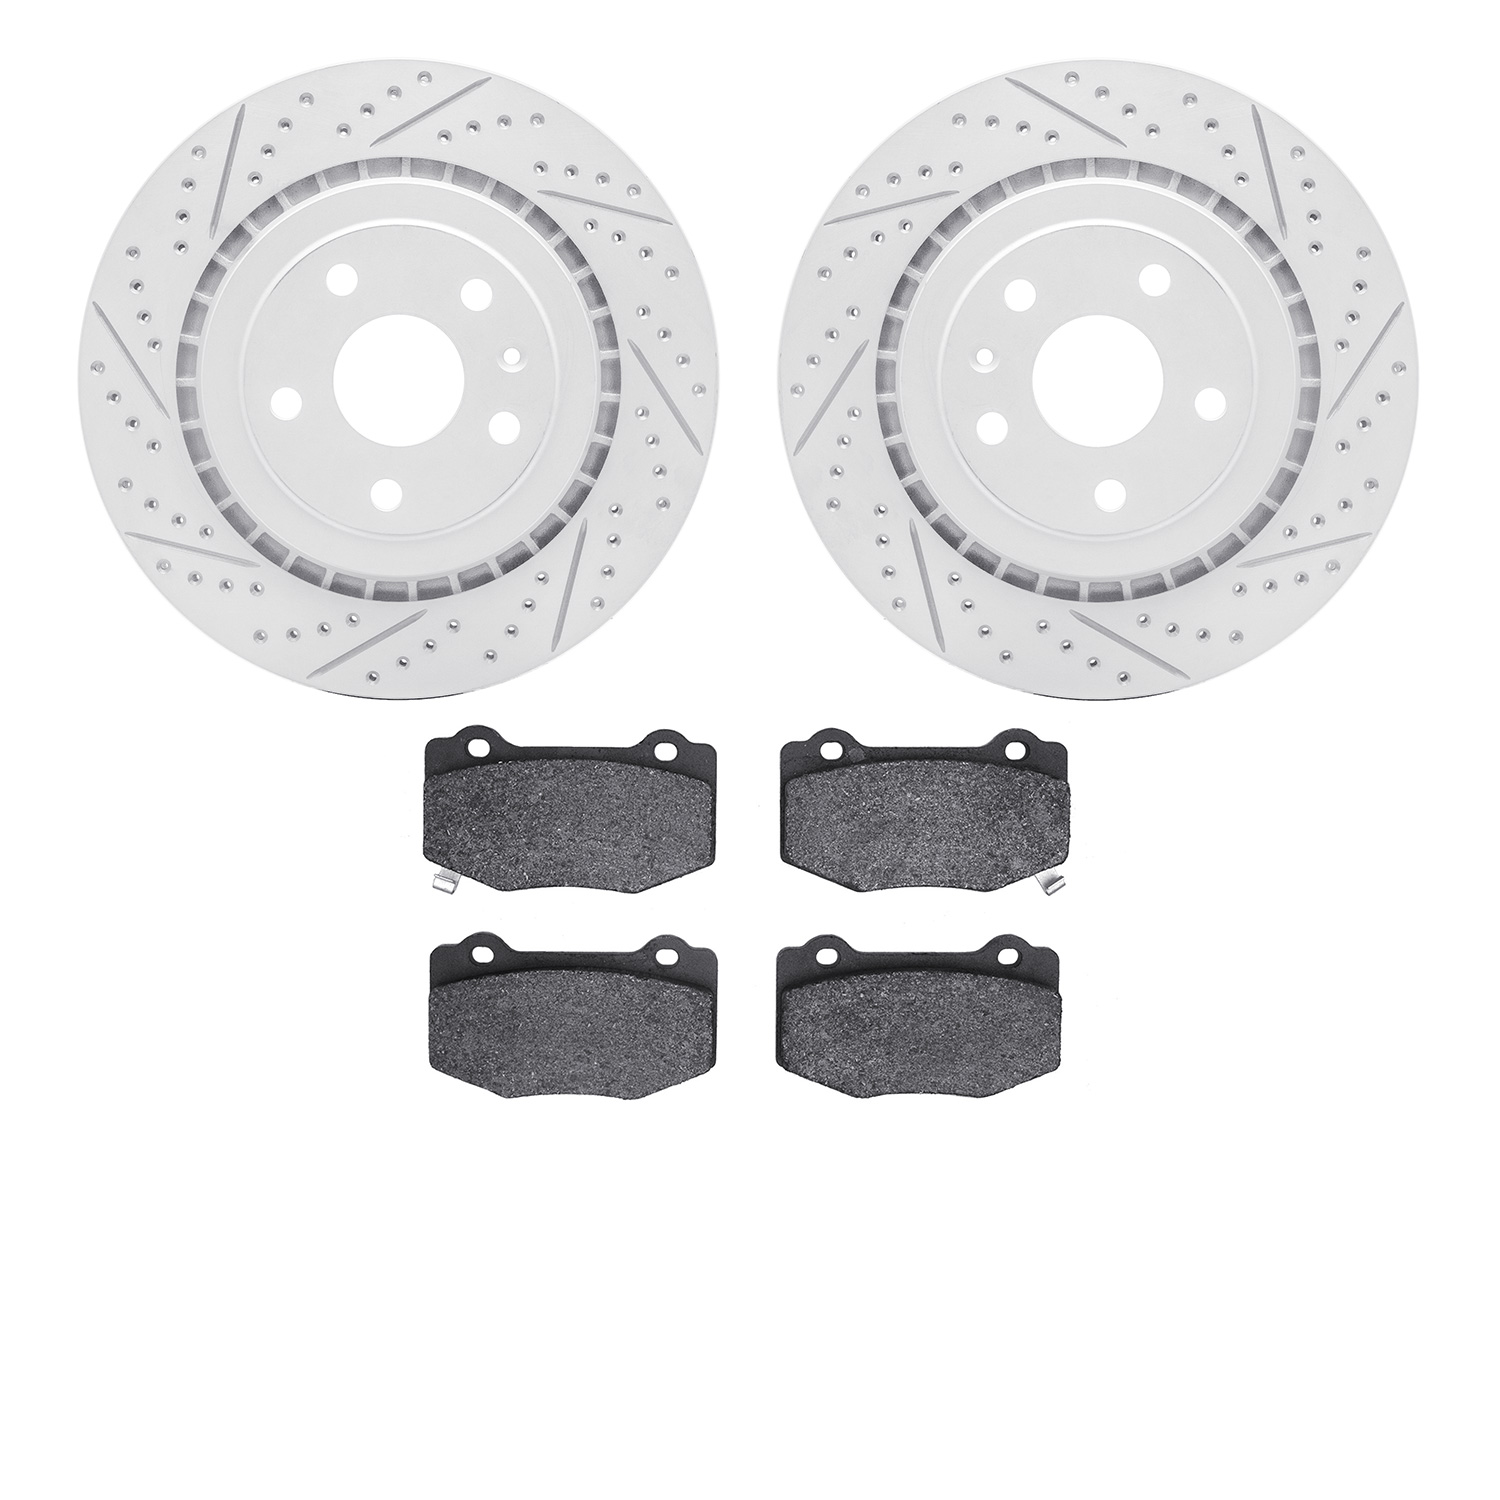 2602-47037 Geoperformance Drilled/Slotted Rotors w/5000 Euro Ceramic Brake Pads Kit, Fits Select GM, Position: Rear